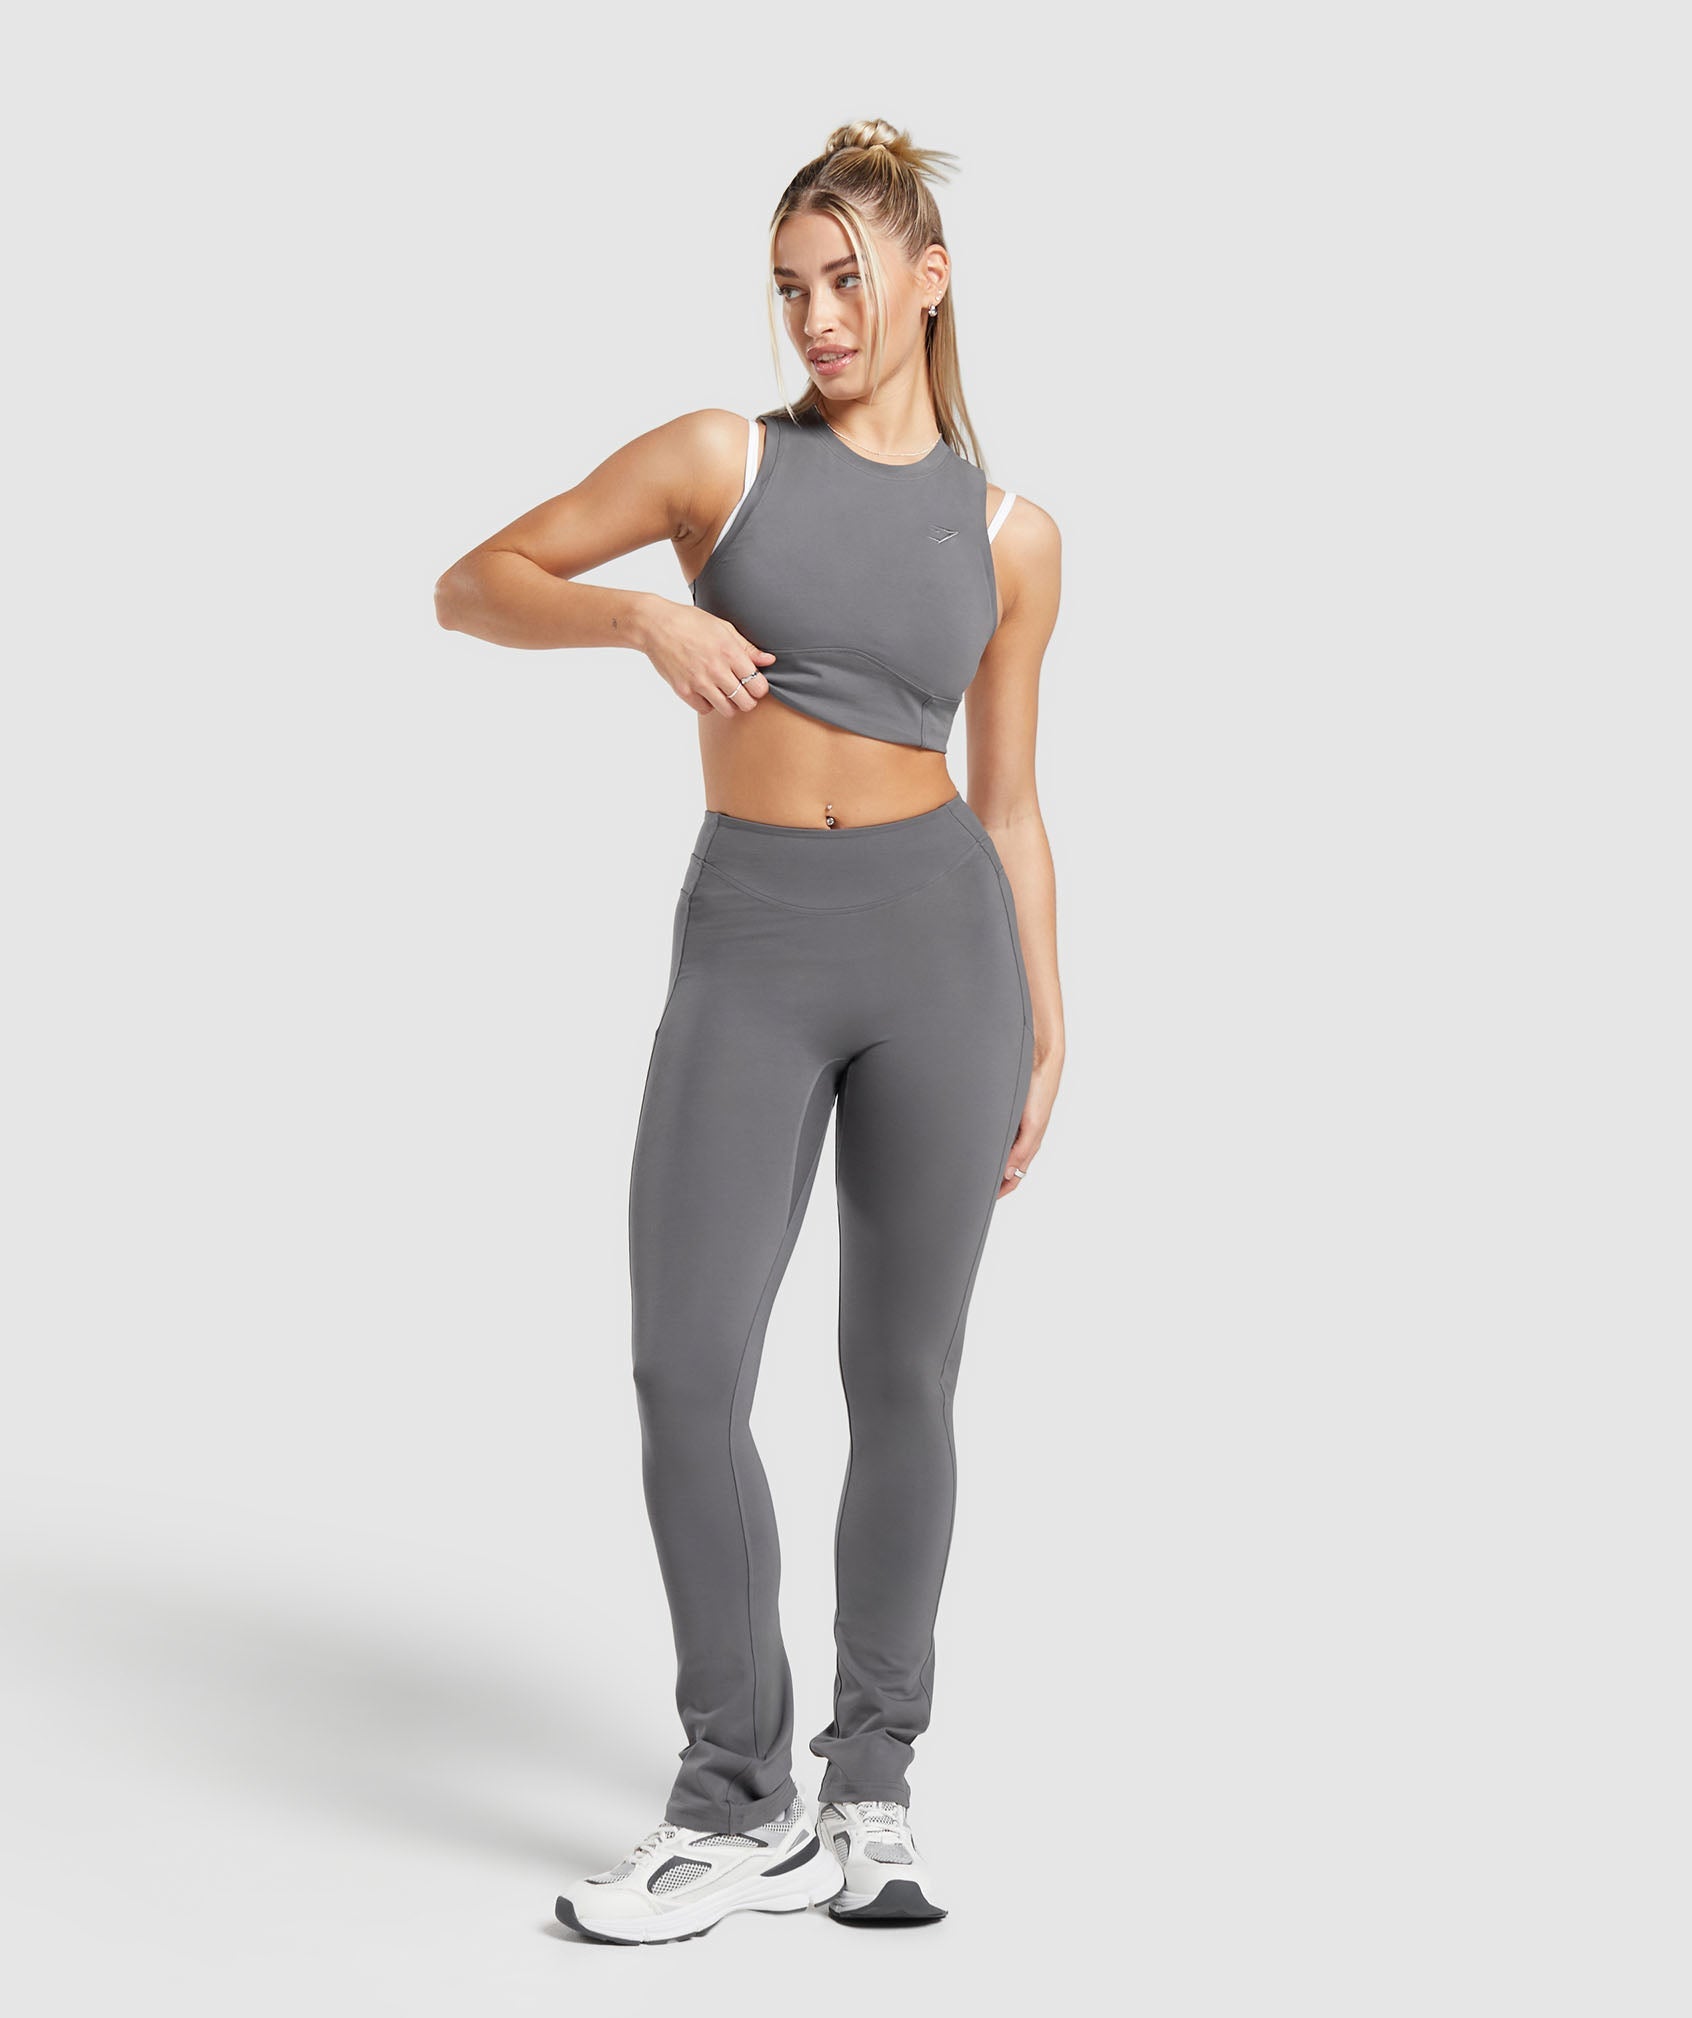 Rest Day Cotton Contour Tank in Brushed Grey - view 4